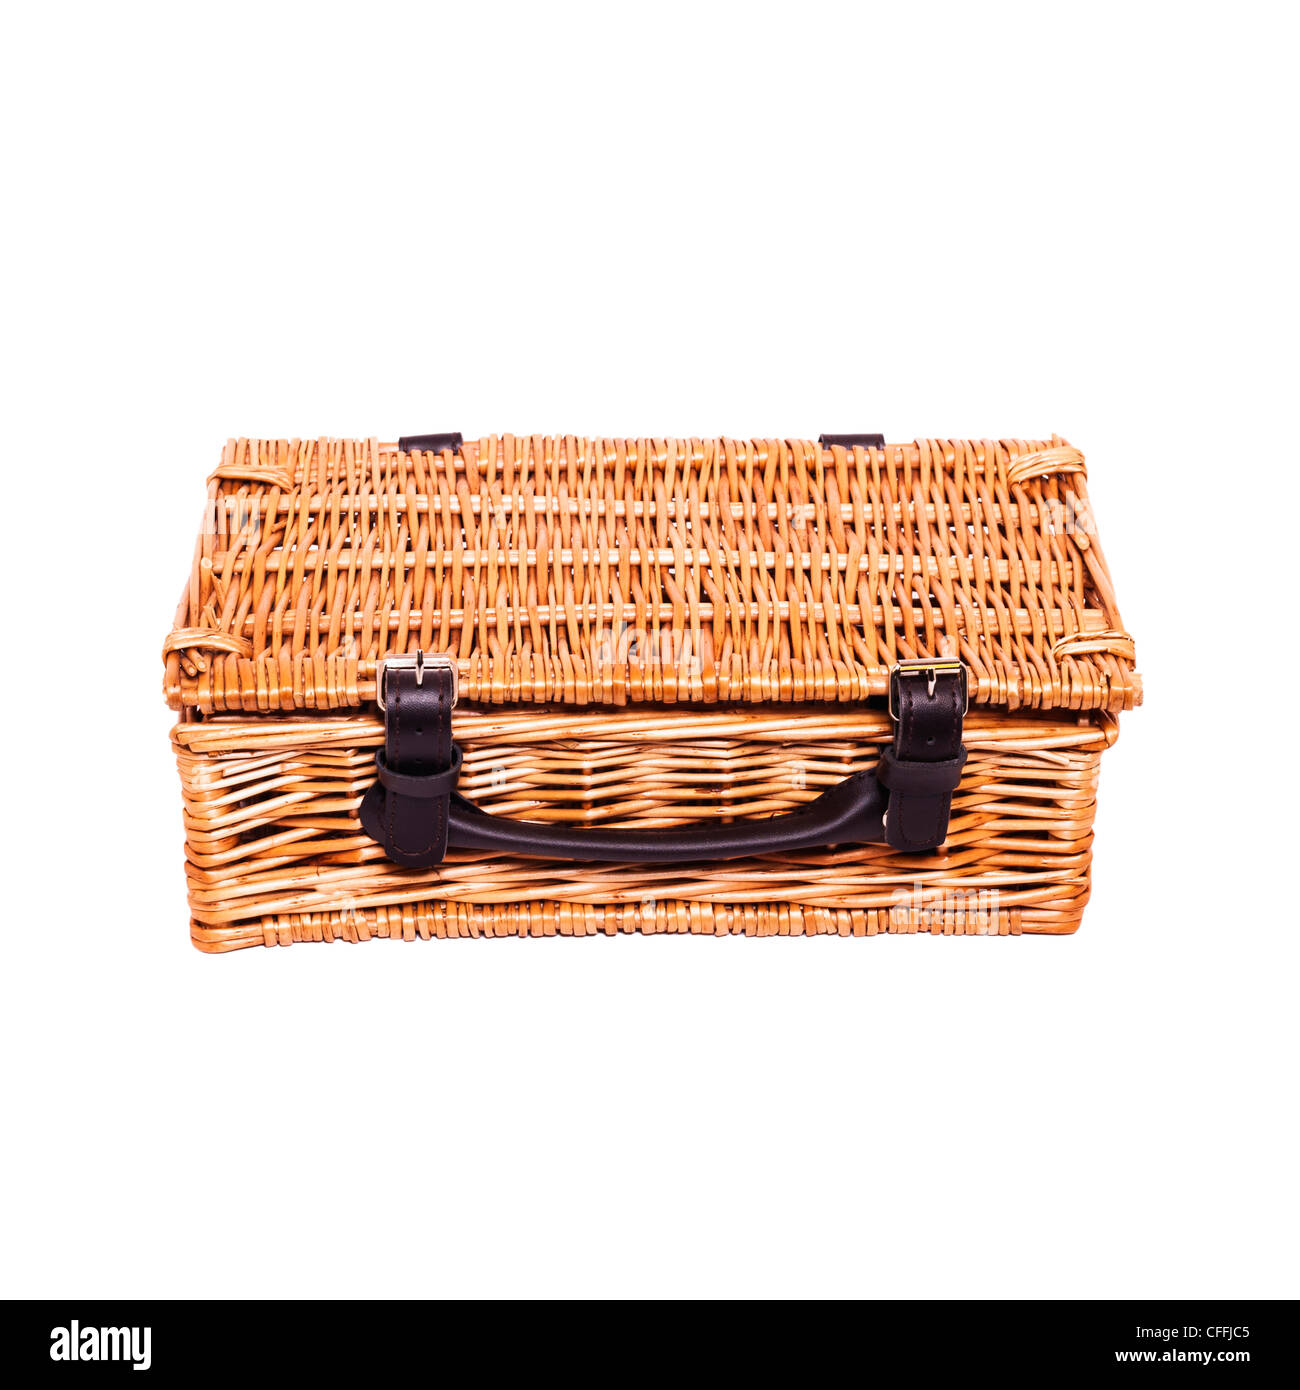 A small traditional wicker picnic basket on a white background Stock Photo